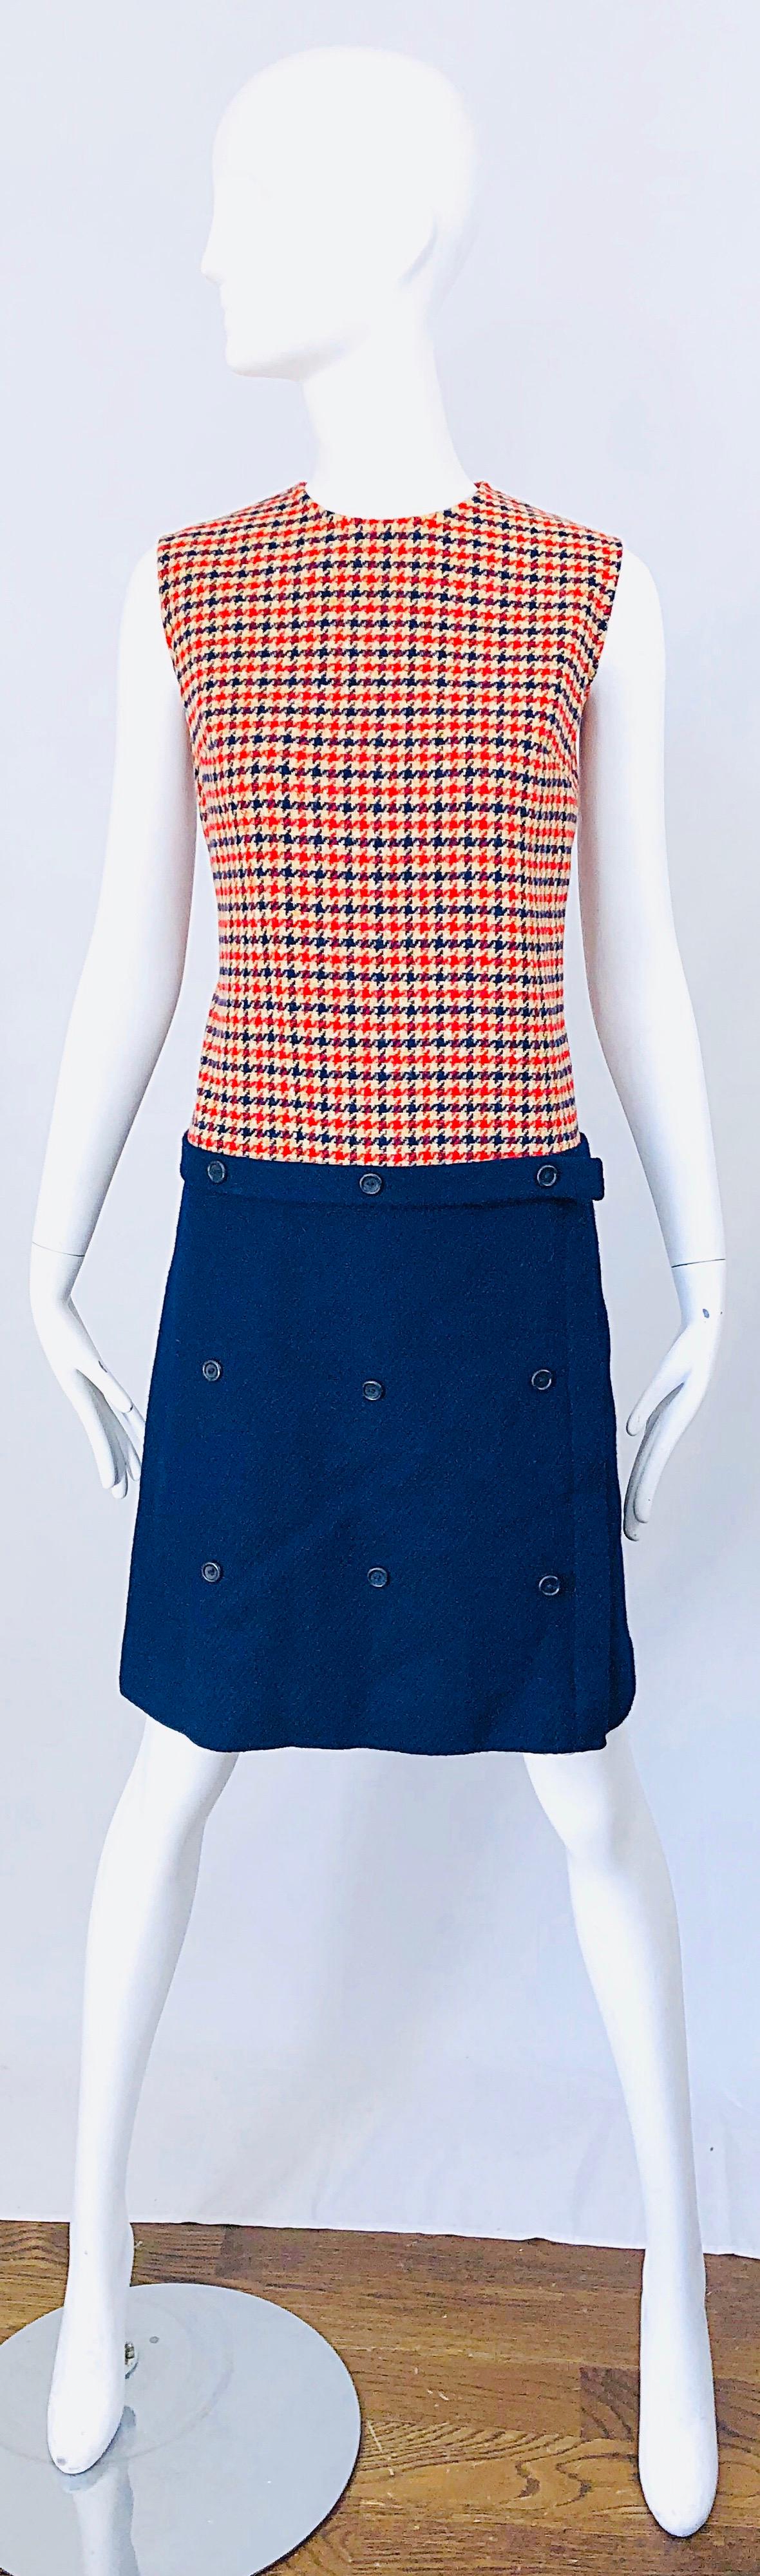 Chic 1960s STANLEY WYLLINS red, ivory and navy blue checkered wool mod shift dress! Features an ivory and red checkered bodice and navy blue skirt. Buttons featured on the front of the skirt, and buttons down the back bodice. Can easily be worn day